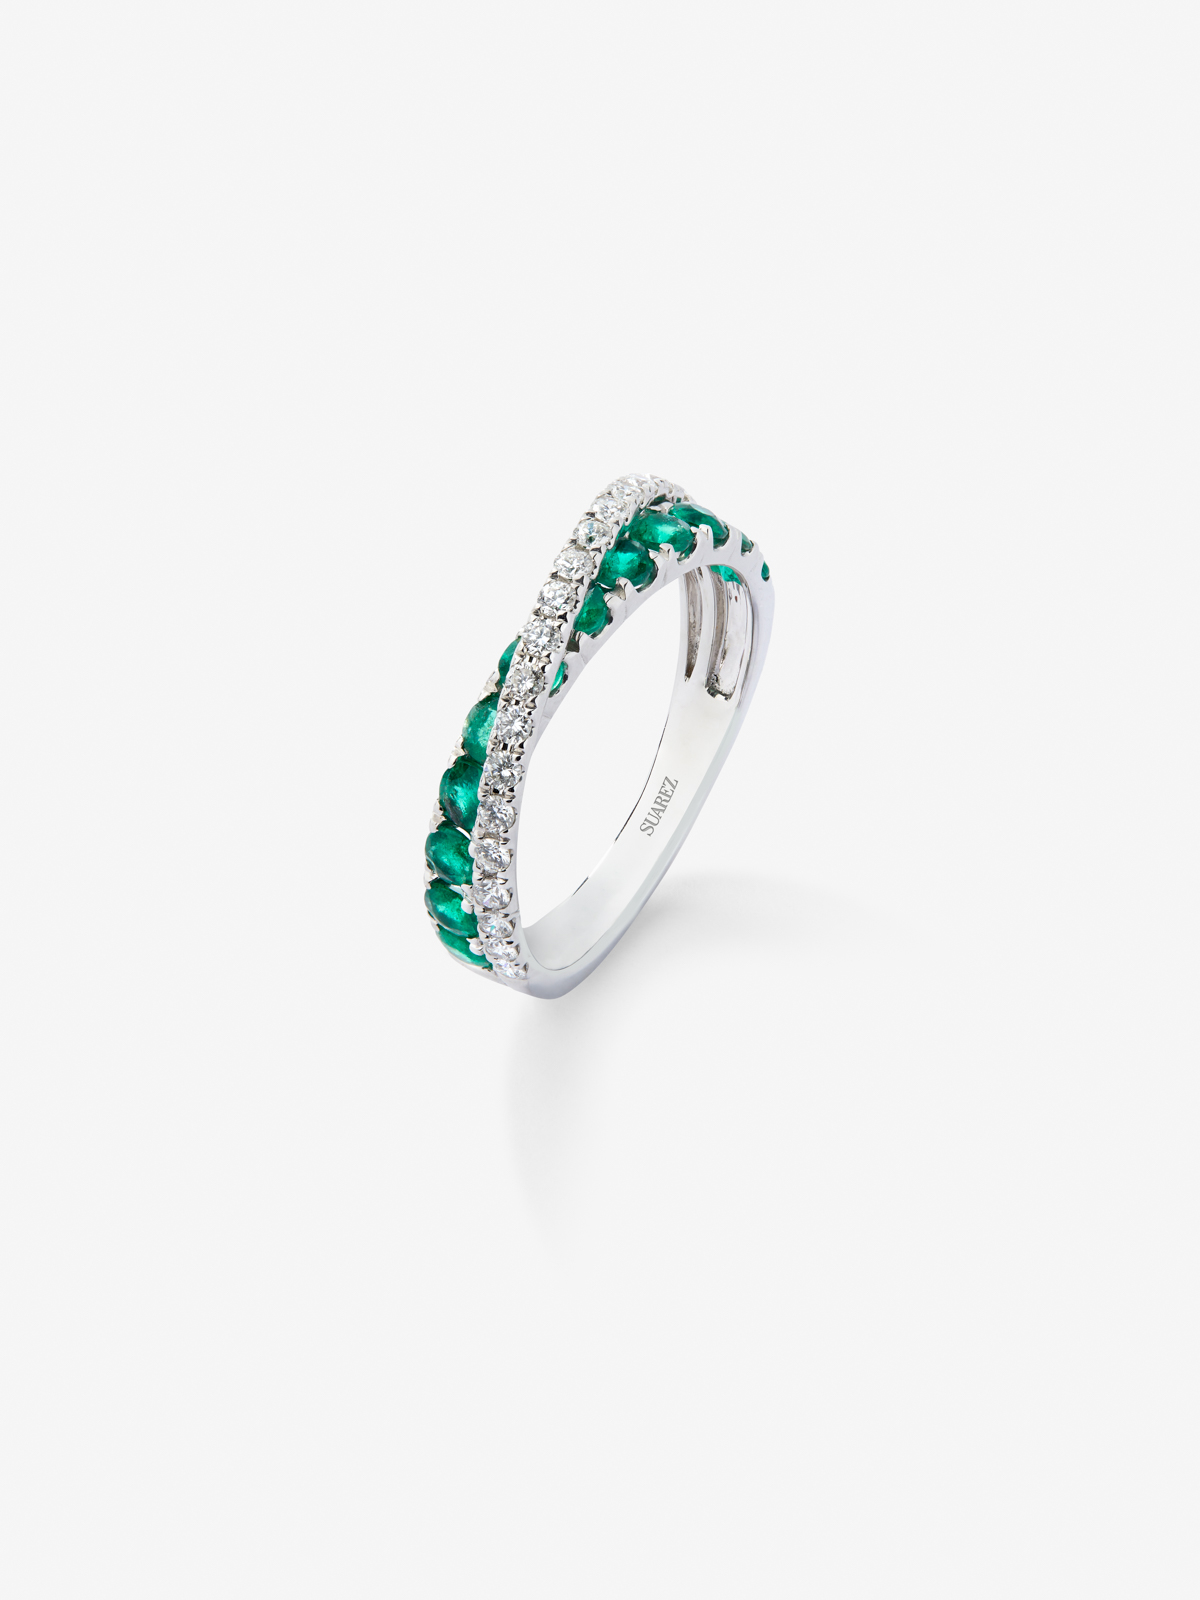 18K White Gold Cross Ring with Emerald and Diamond